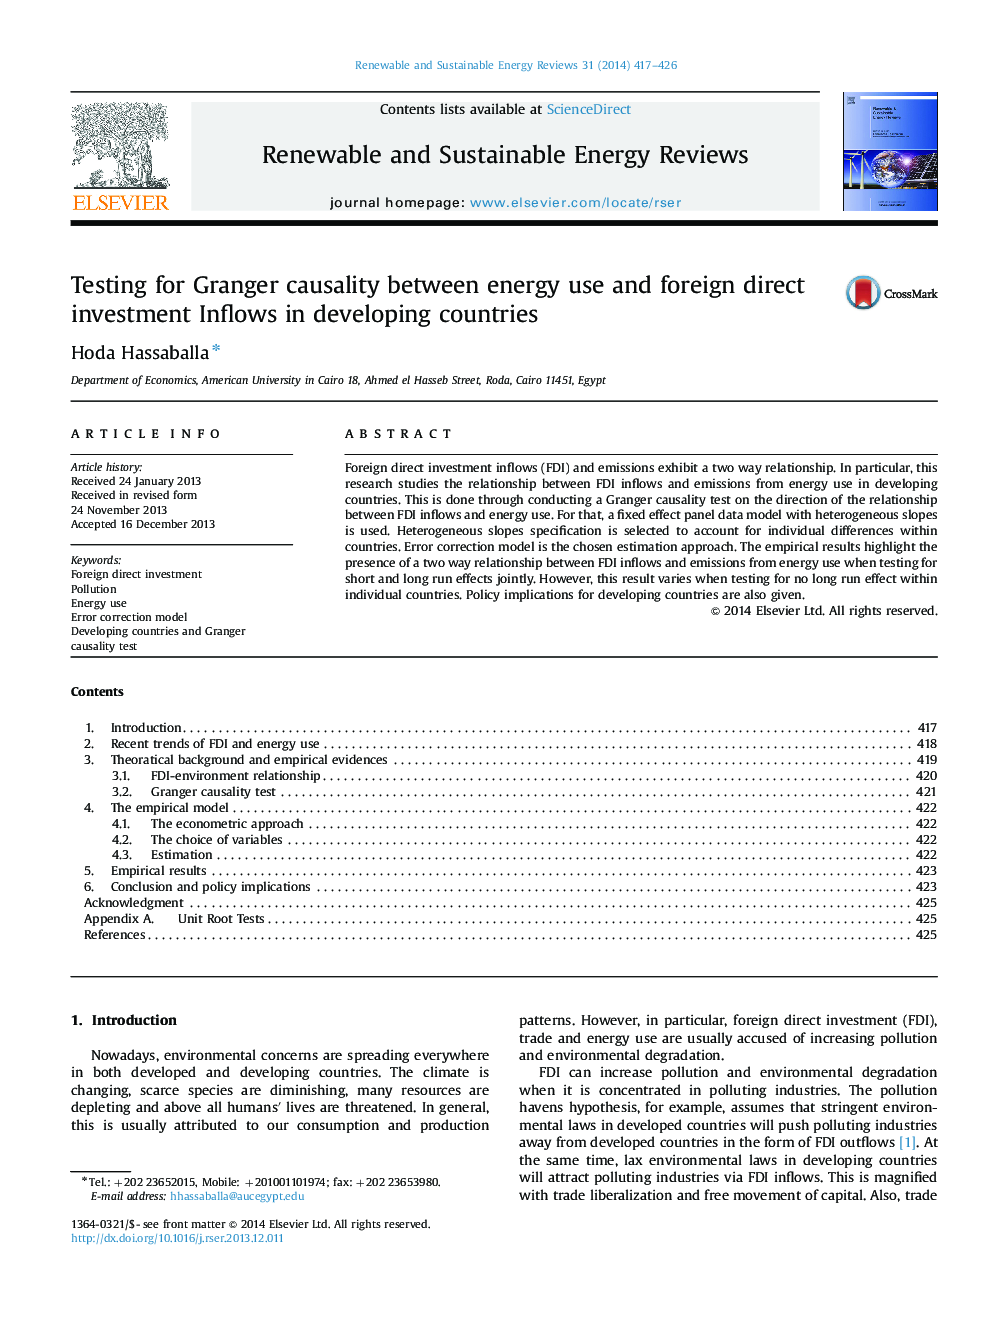 Testing for Granger causality between energy use and foreign direct investment Inflows in developing countries